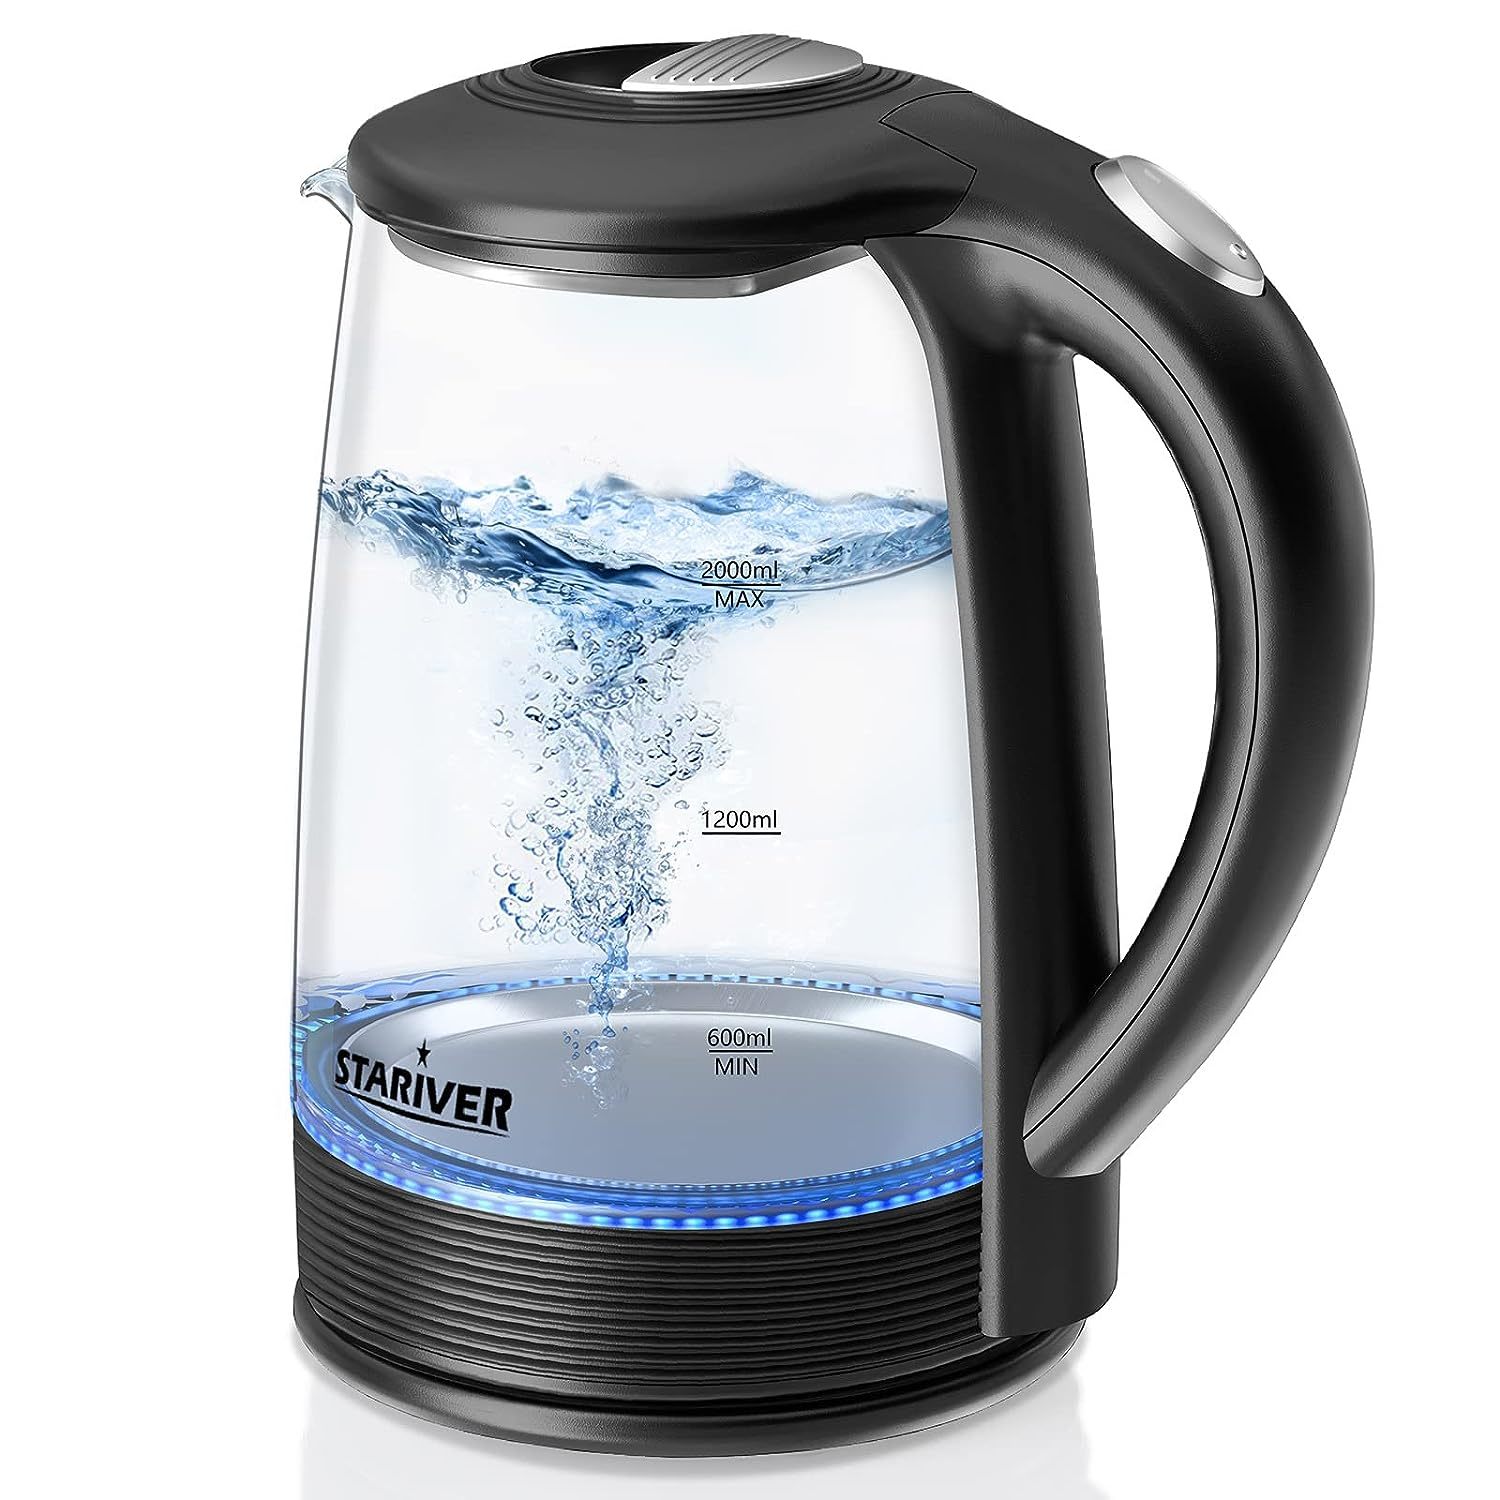 Electric Kettle, 2L Electric Tea Kettle, and 50 similar items